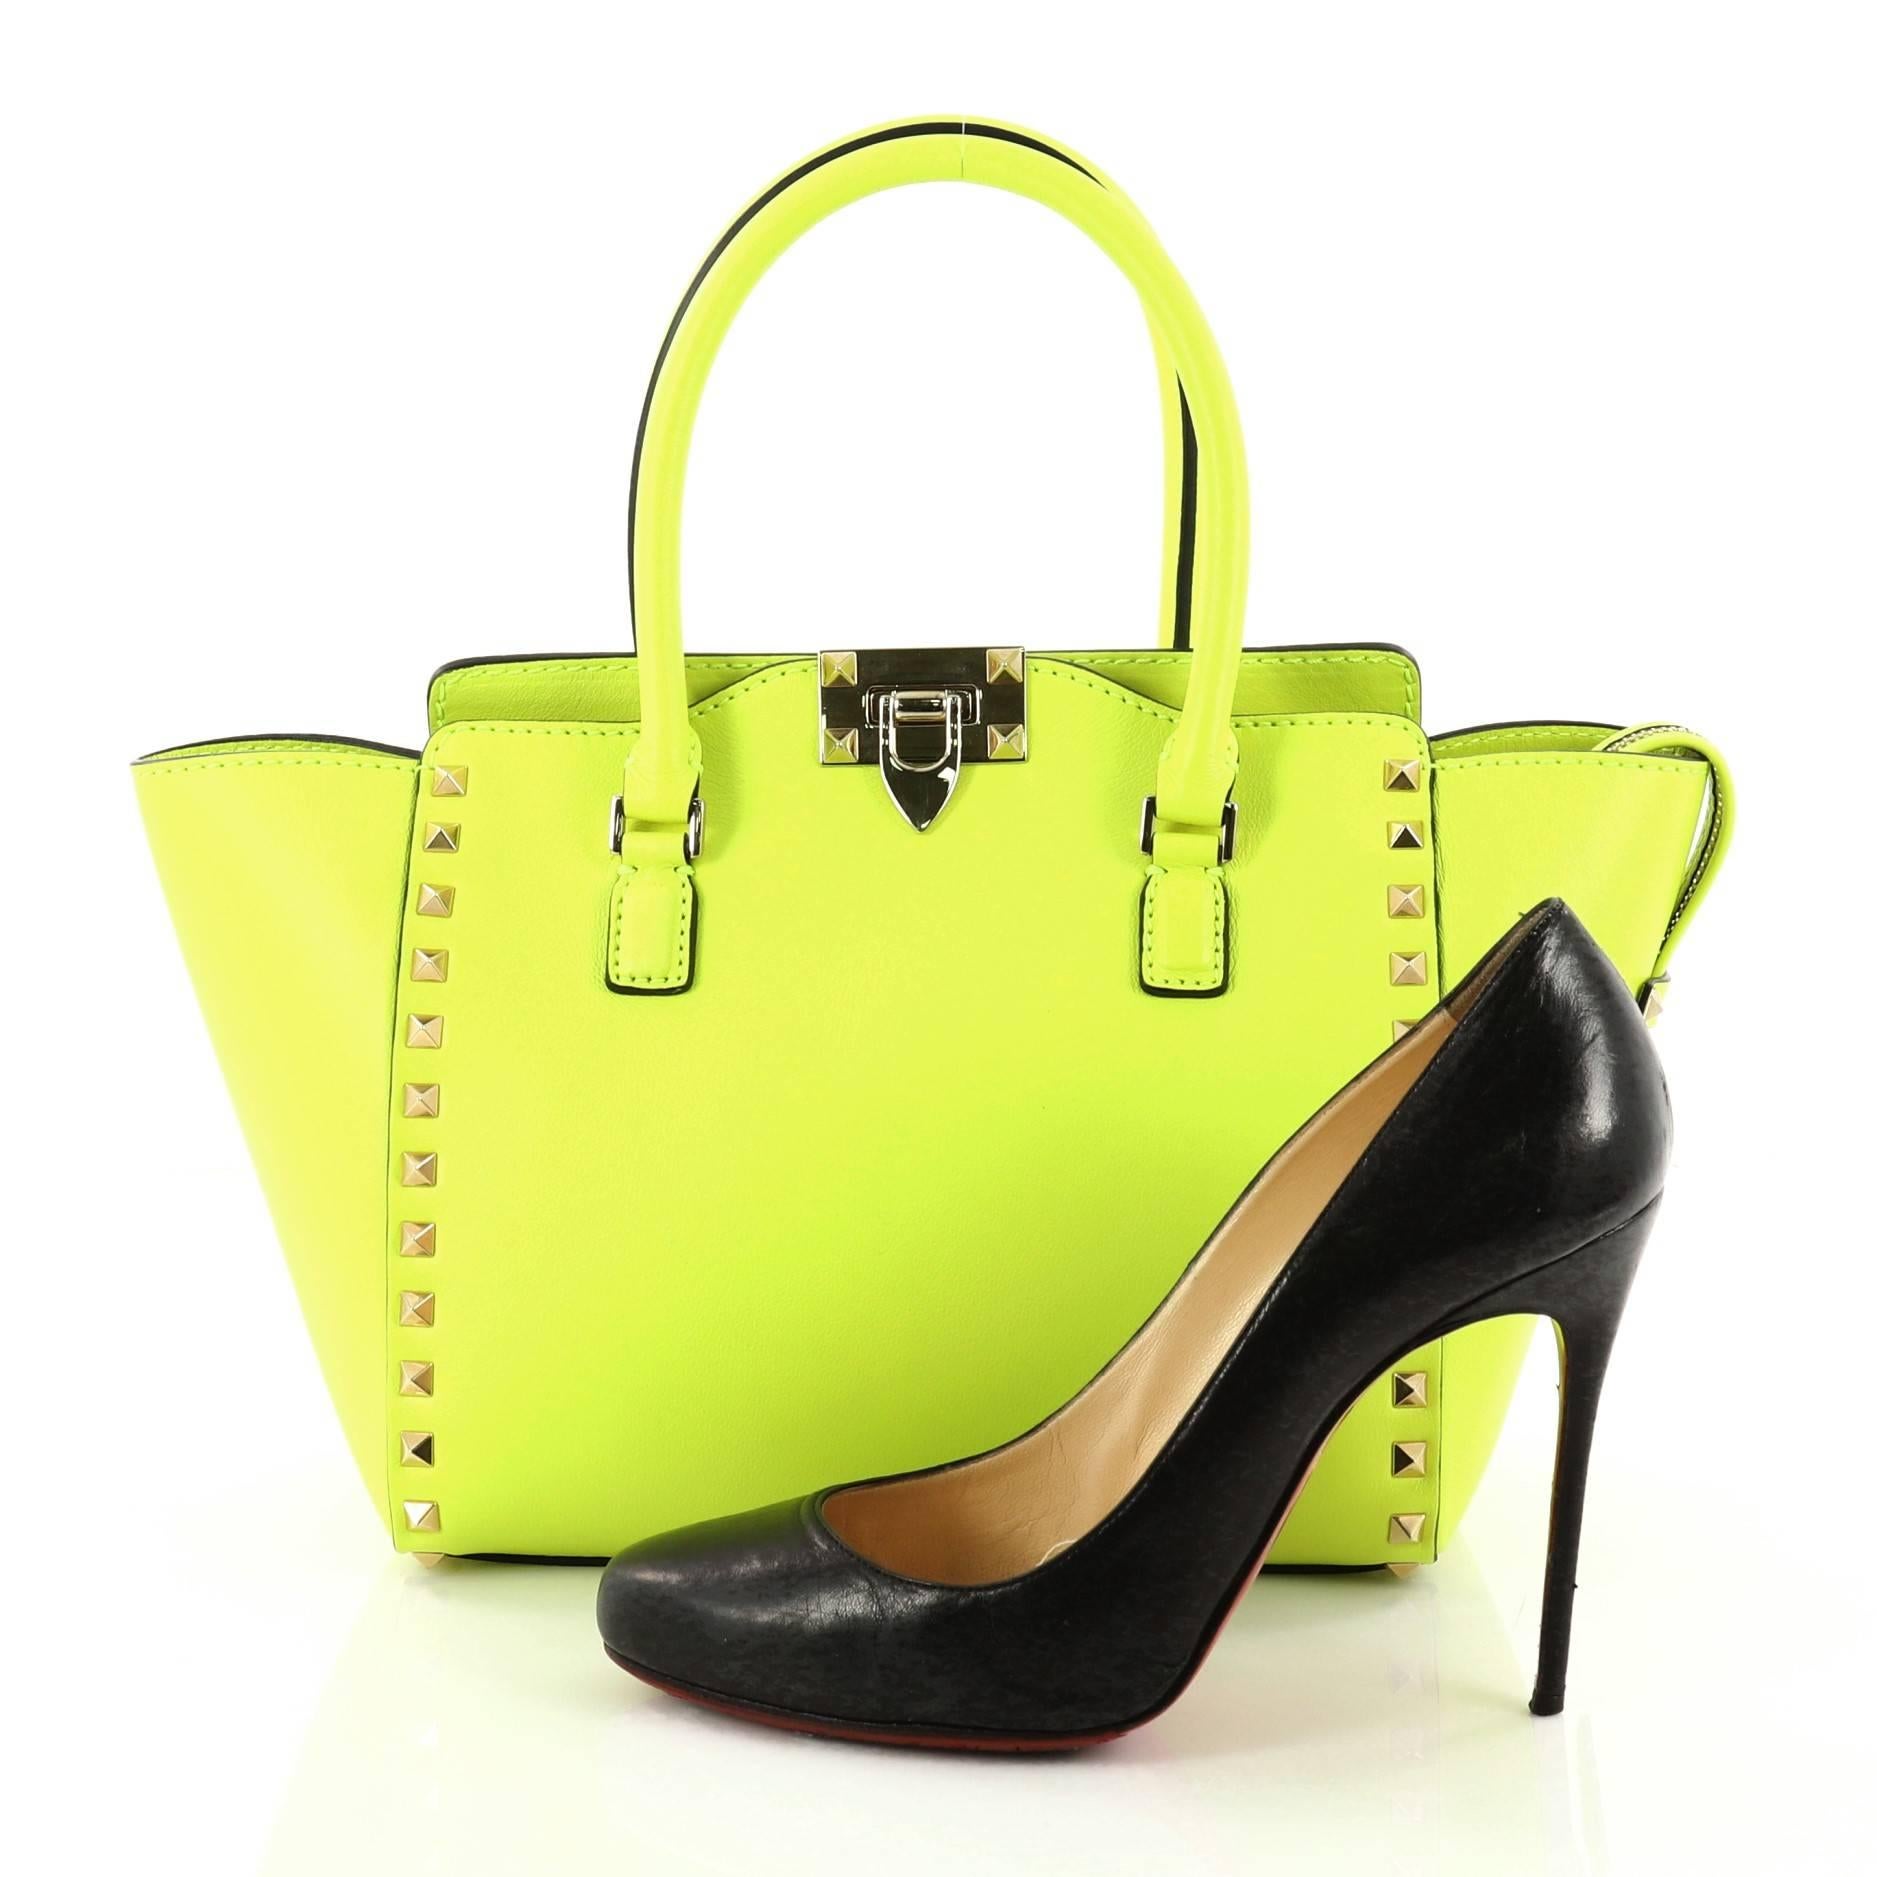 This authentic Valentino Rockstud Tote Rigid Leather Small is the perfect daily bag for the on-the-go fashionista. Crafted in sleek neon green rigid leather, this stylishly structured tote features tall dual-rolled handles, gold-tone pyramid stud